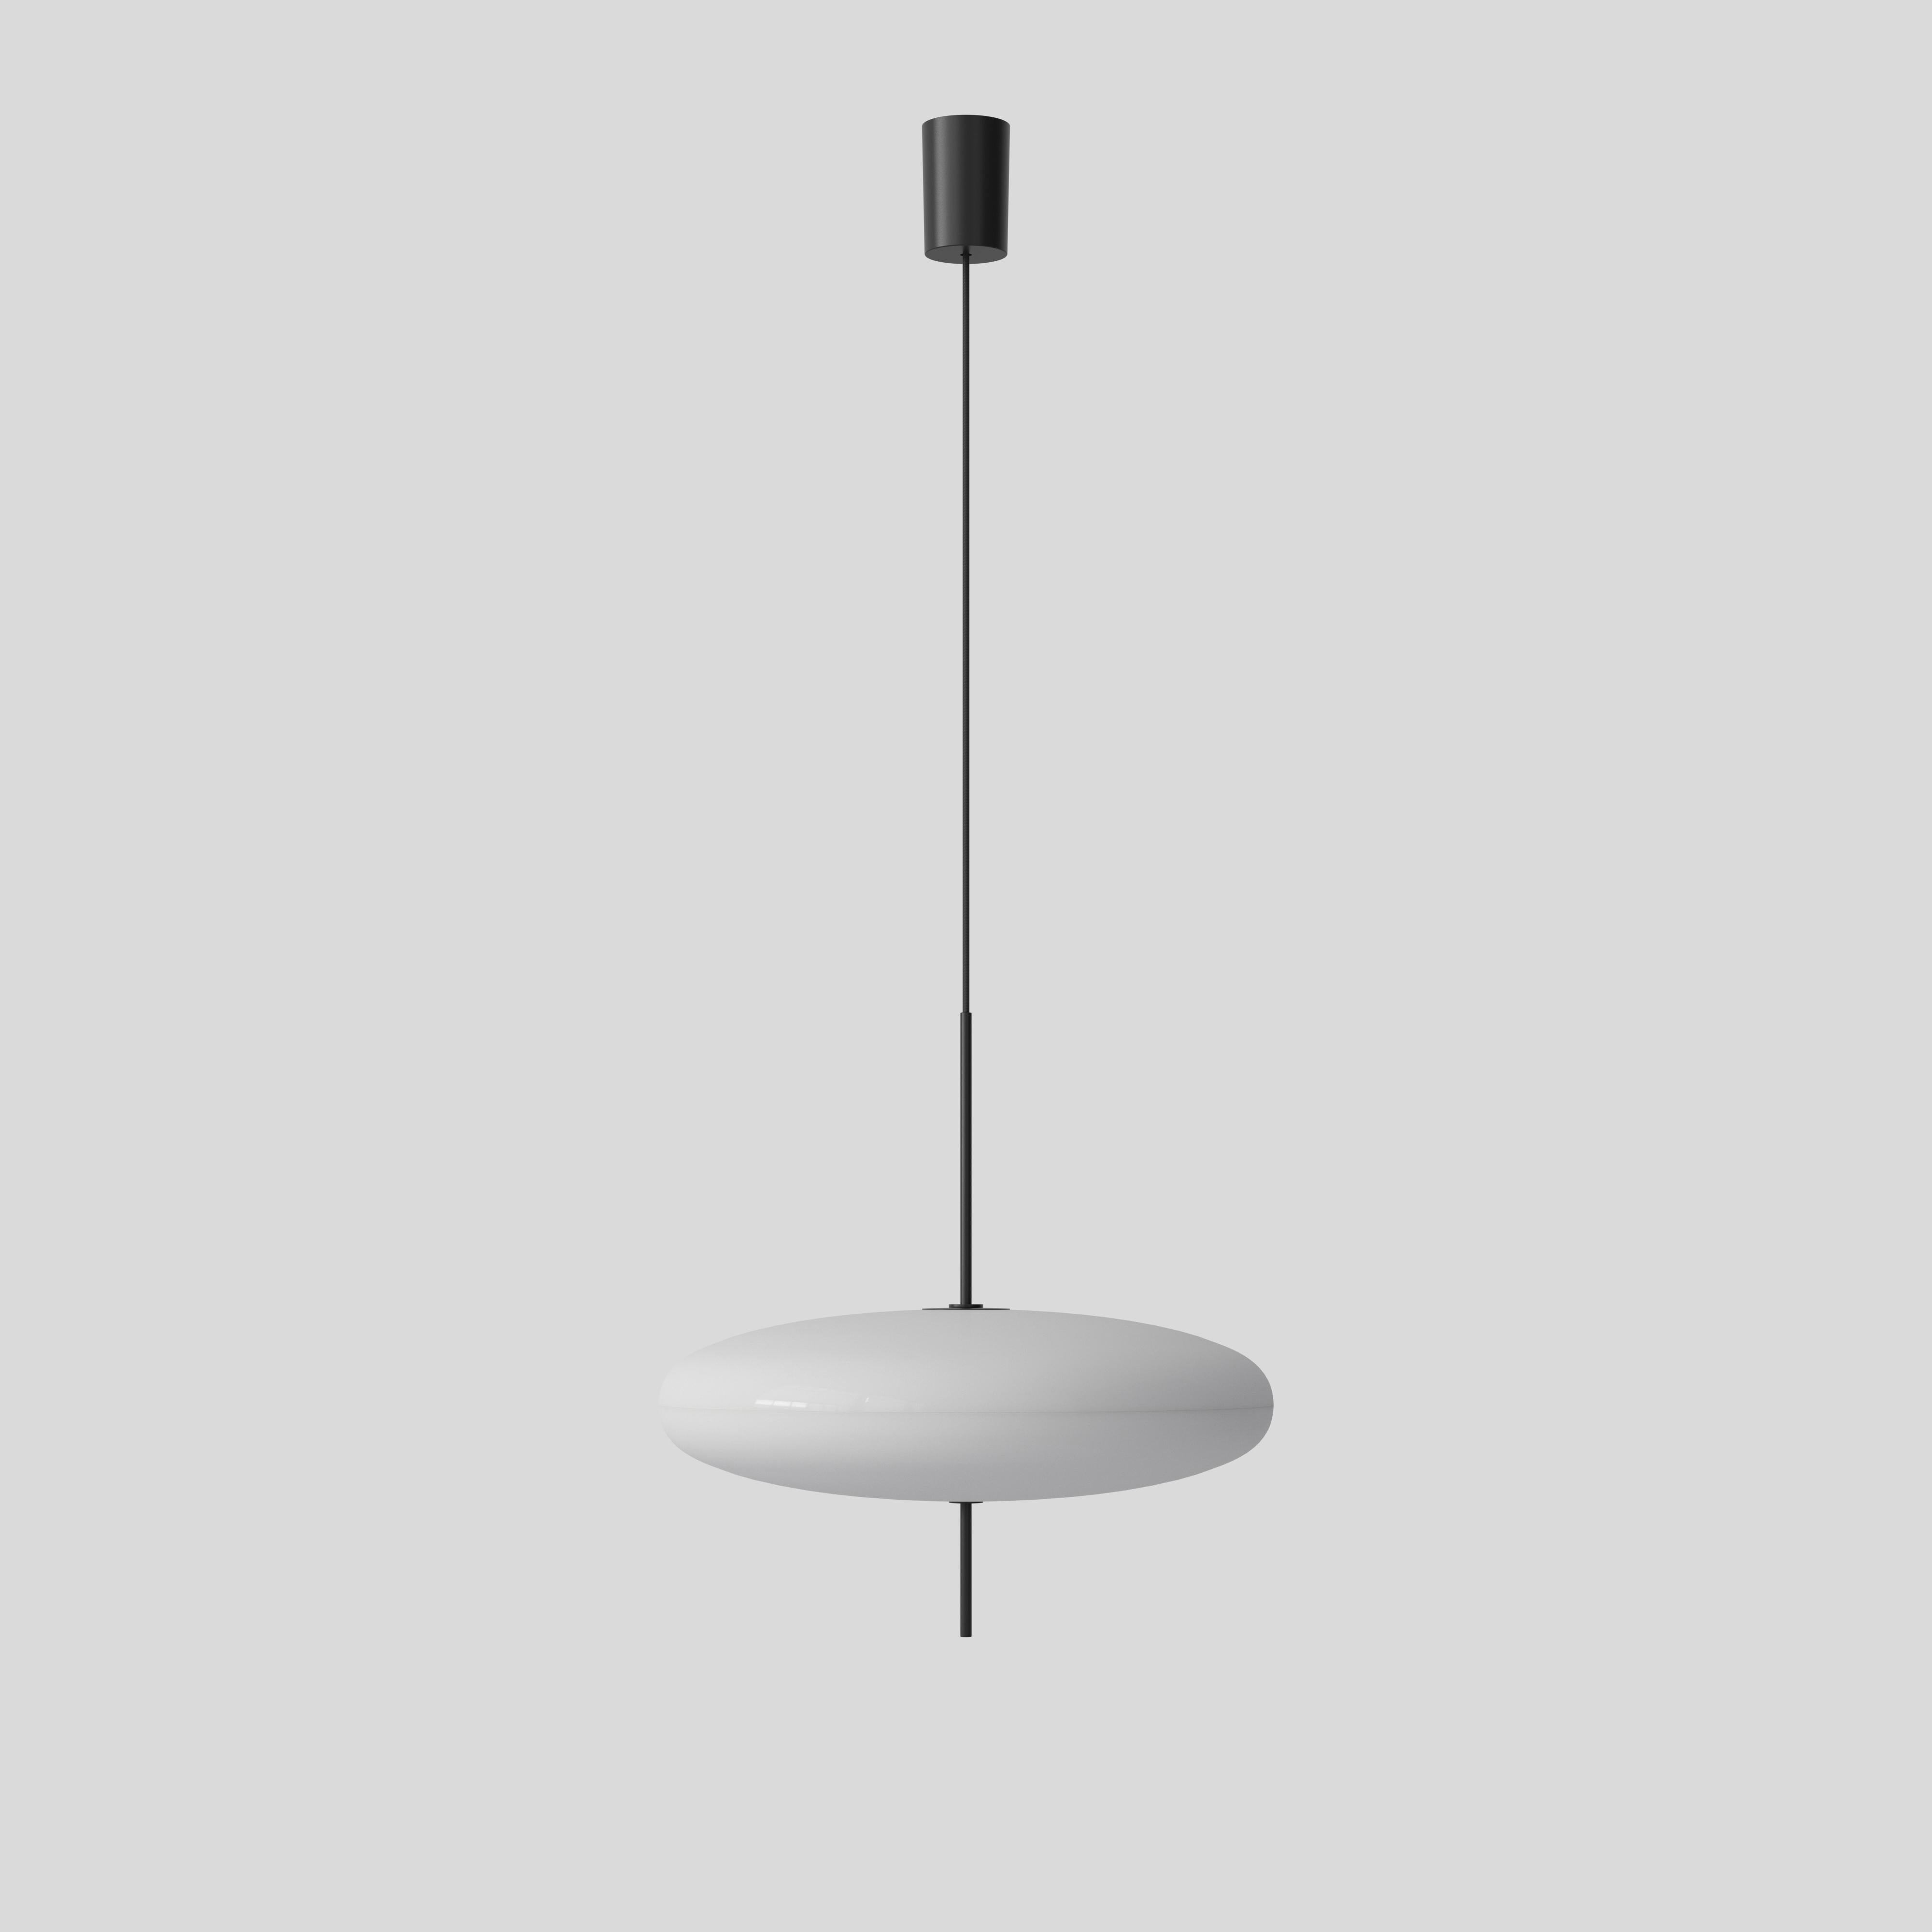 Gino Sarfatti lamp model 2065.
White diffuser, black hardware, black cable.
Manufactured by Astep

Model 2065
Design by Gino Sarfatti
The 2065 is made of two joined opaline methacrylate saucer-shaped diffusers suspended from the ceiling with a